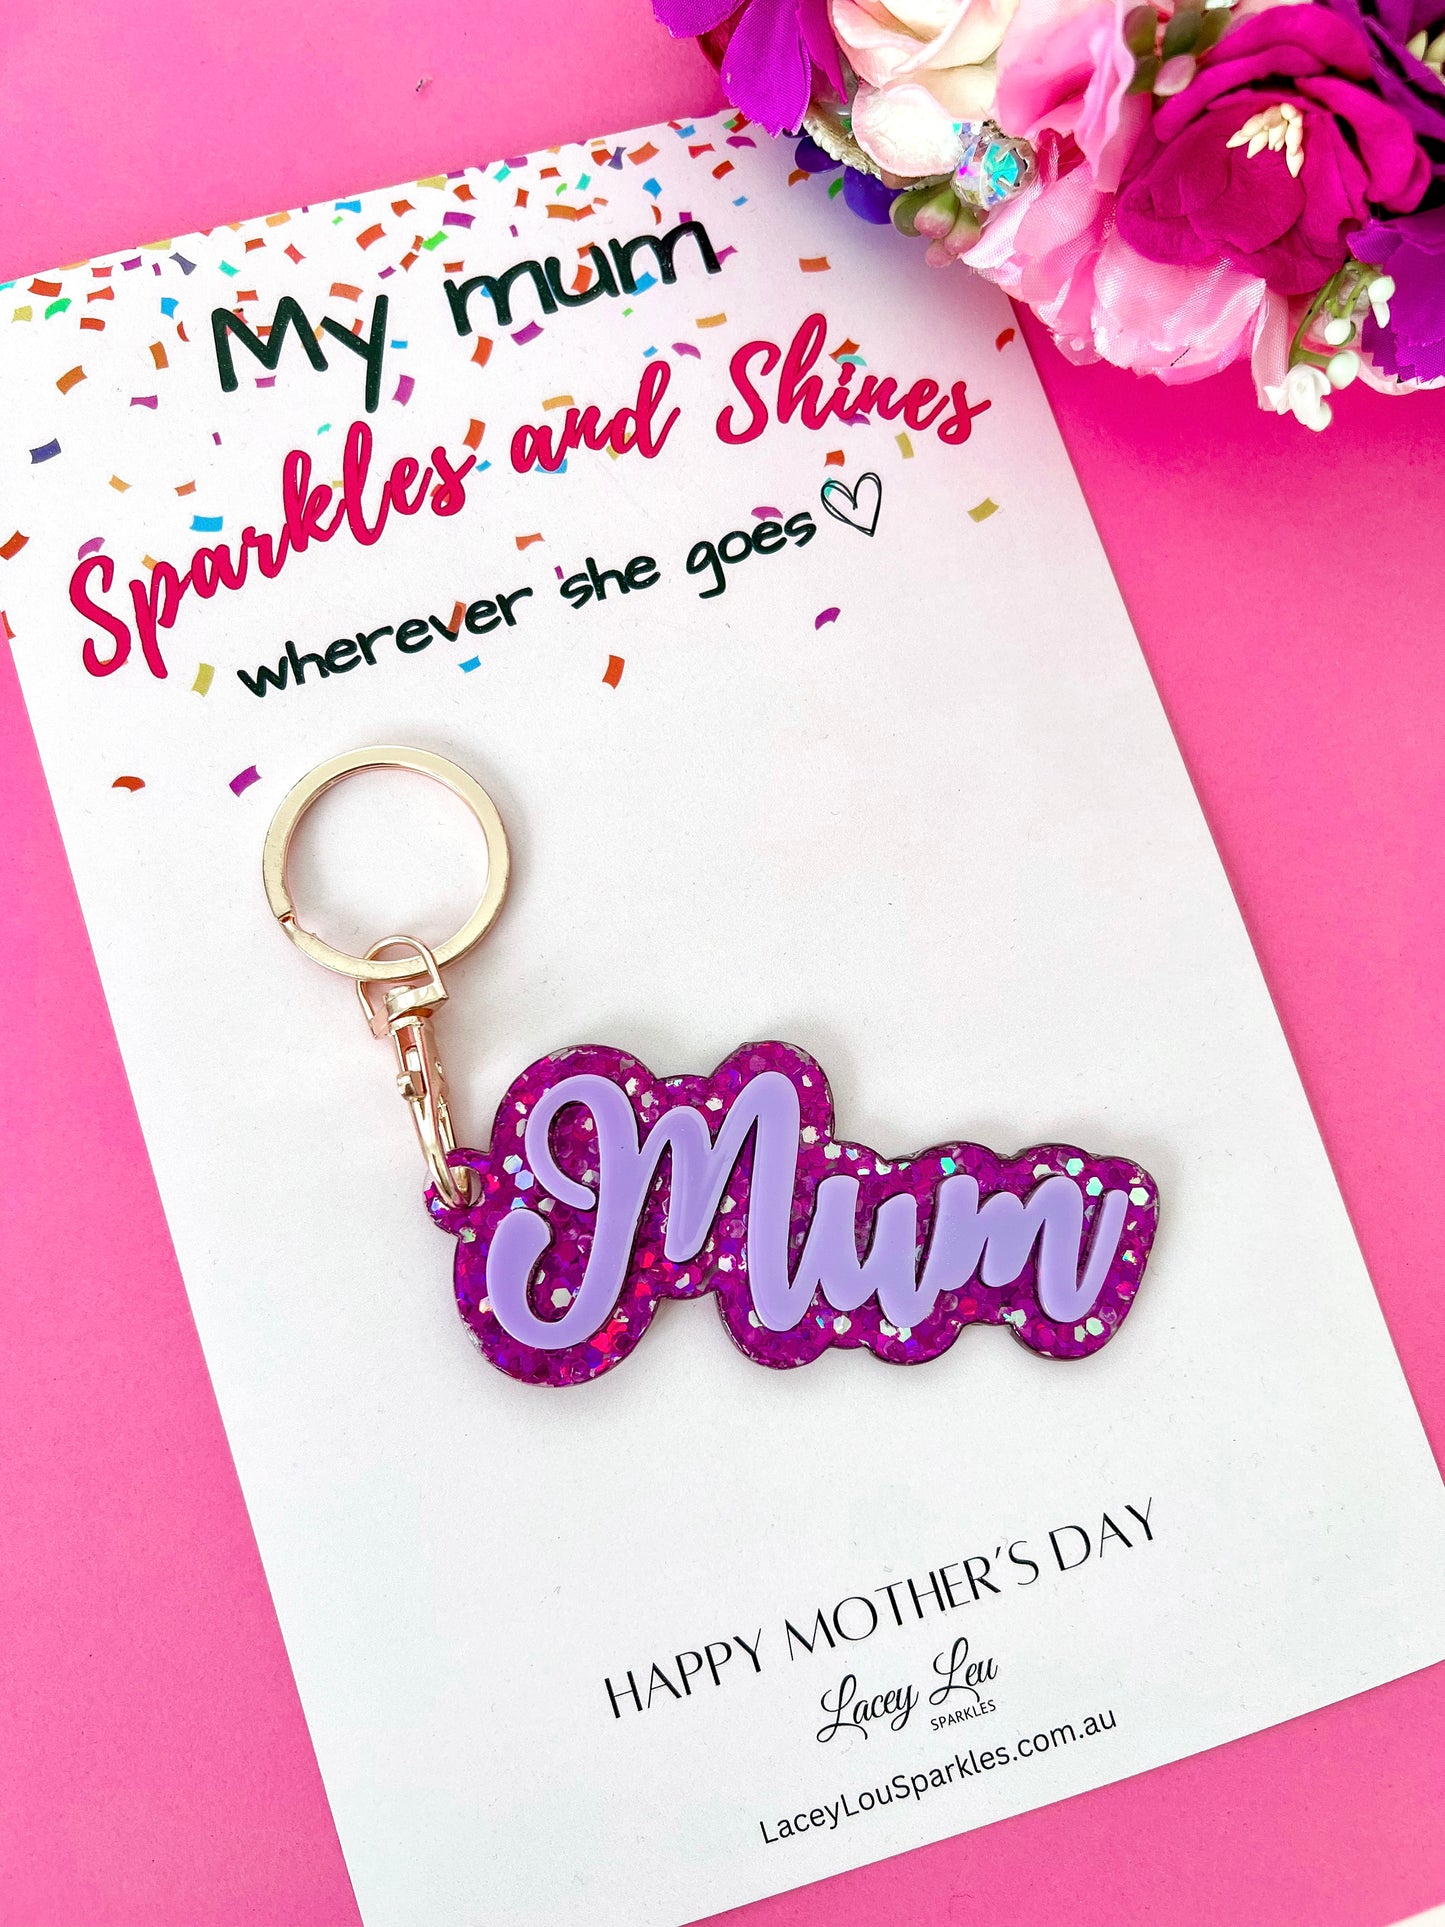 School Mother's Day Stall Earrings 2024